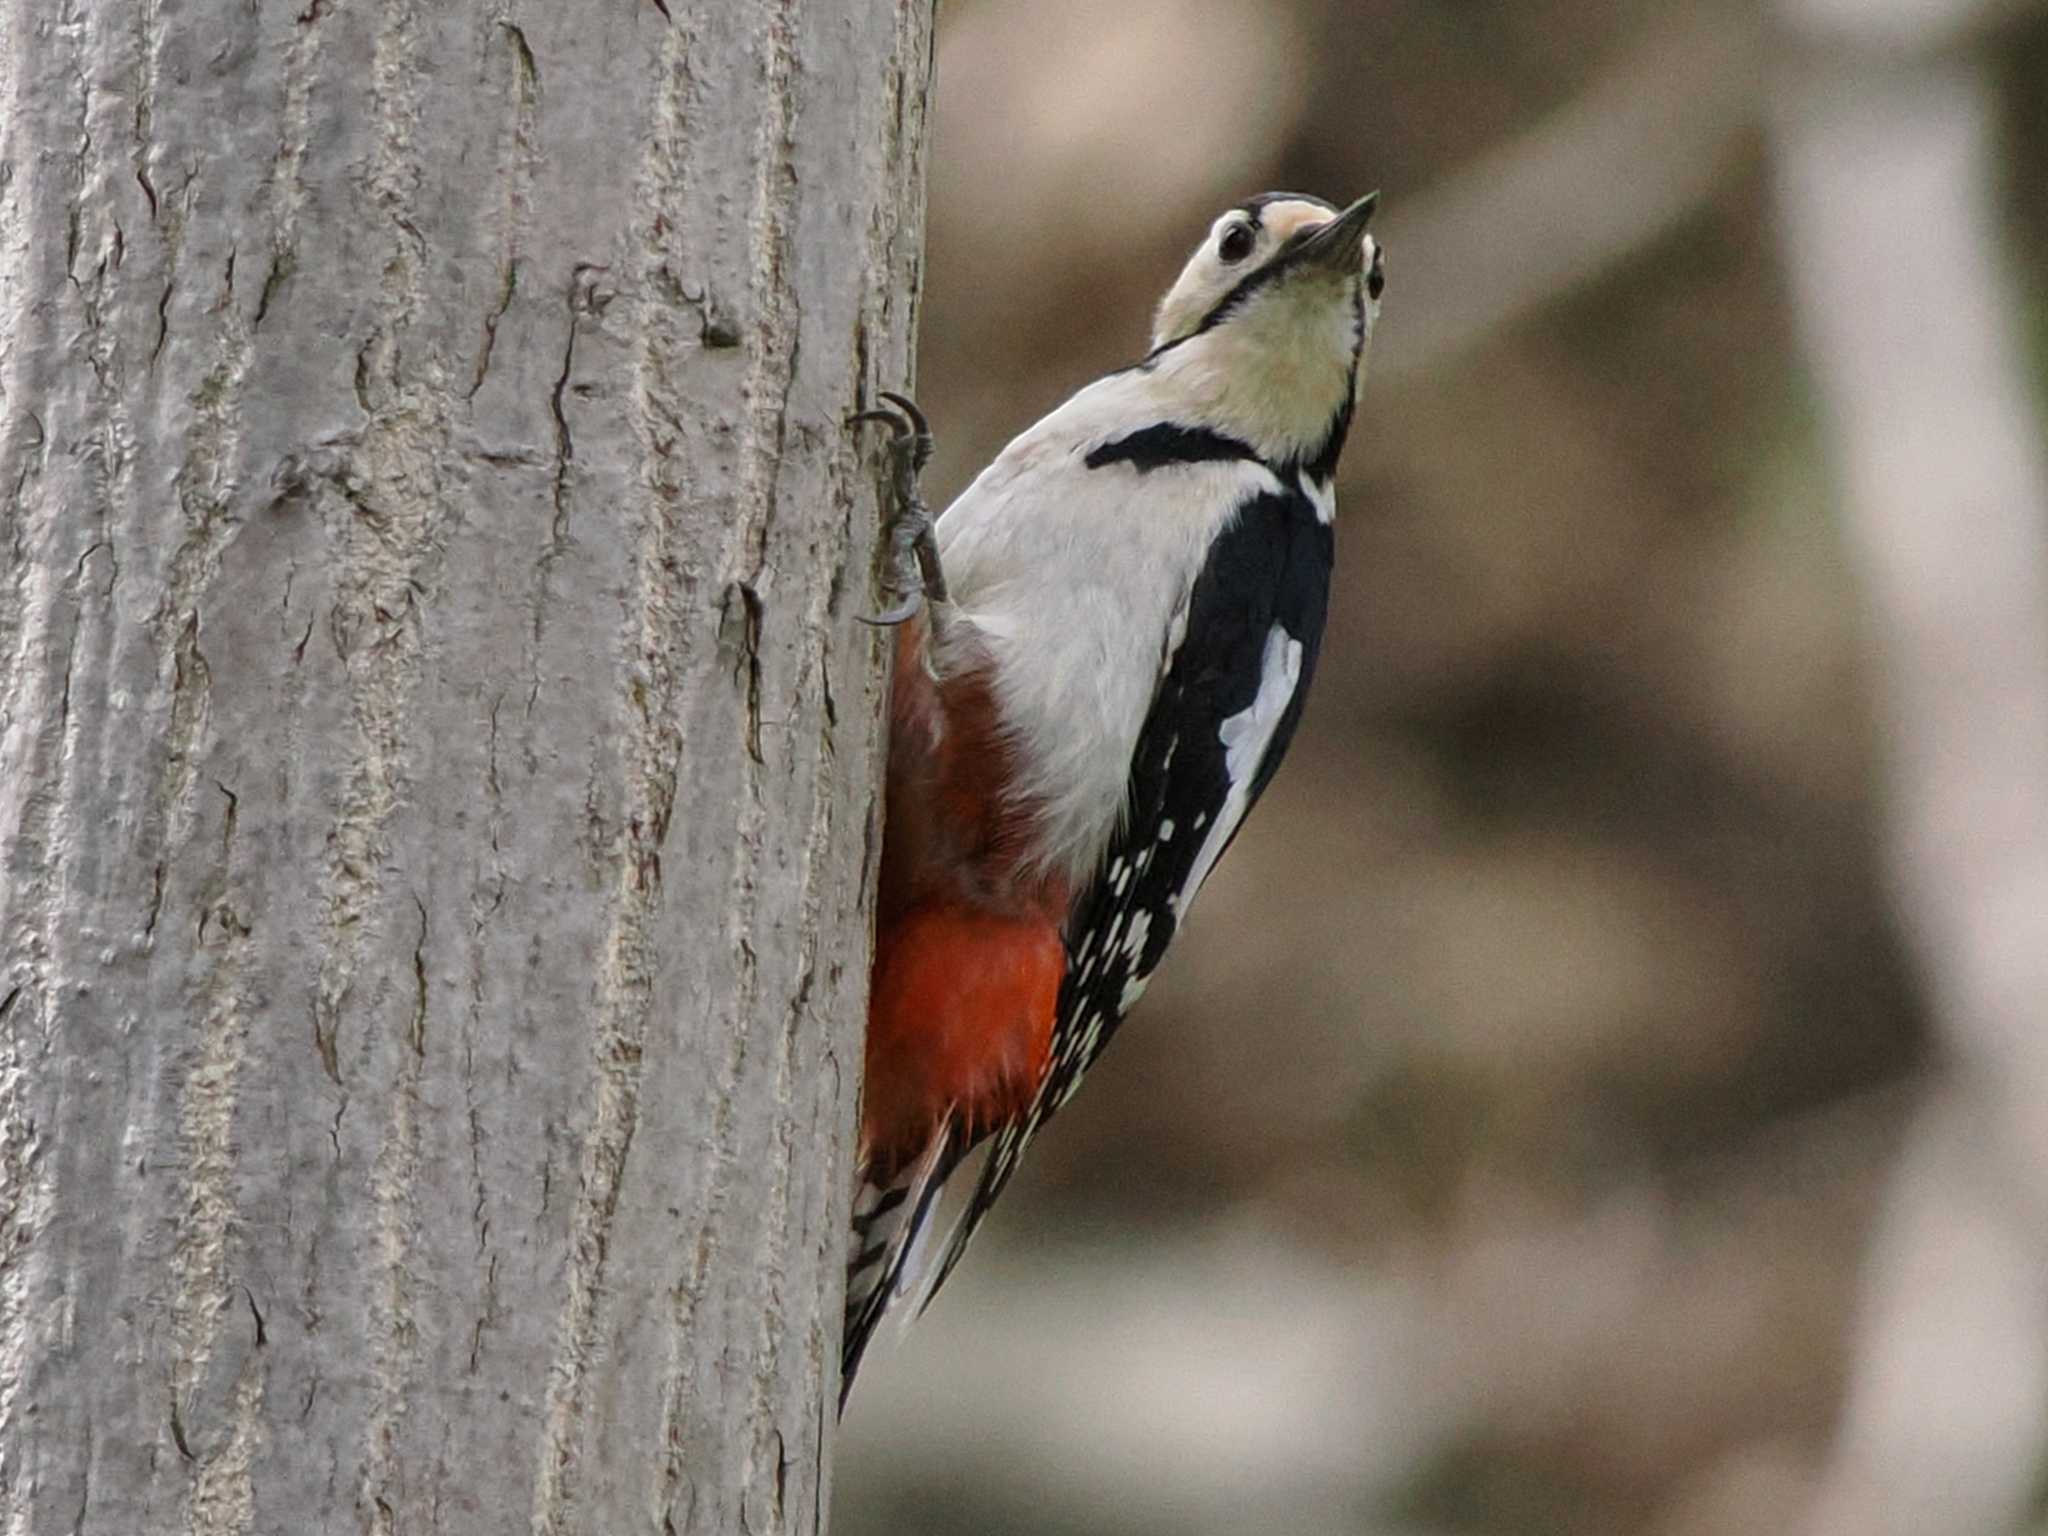 Photo of Great Spotted Woodpecker(japonicus) at 左股川緑地(札幌市西区) by 98_Ark (98ｱｰｸ)